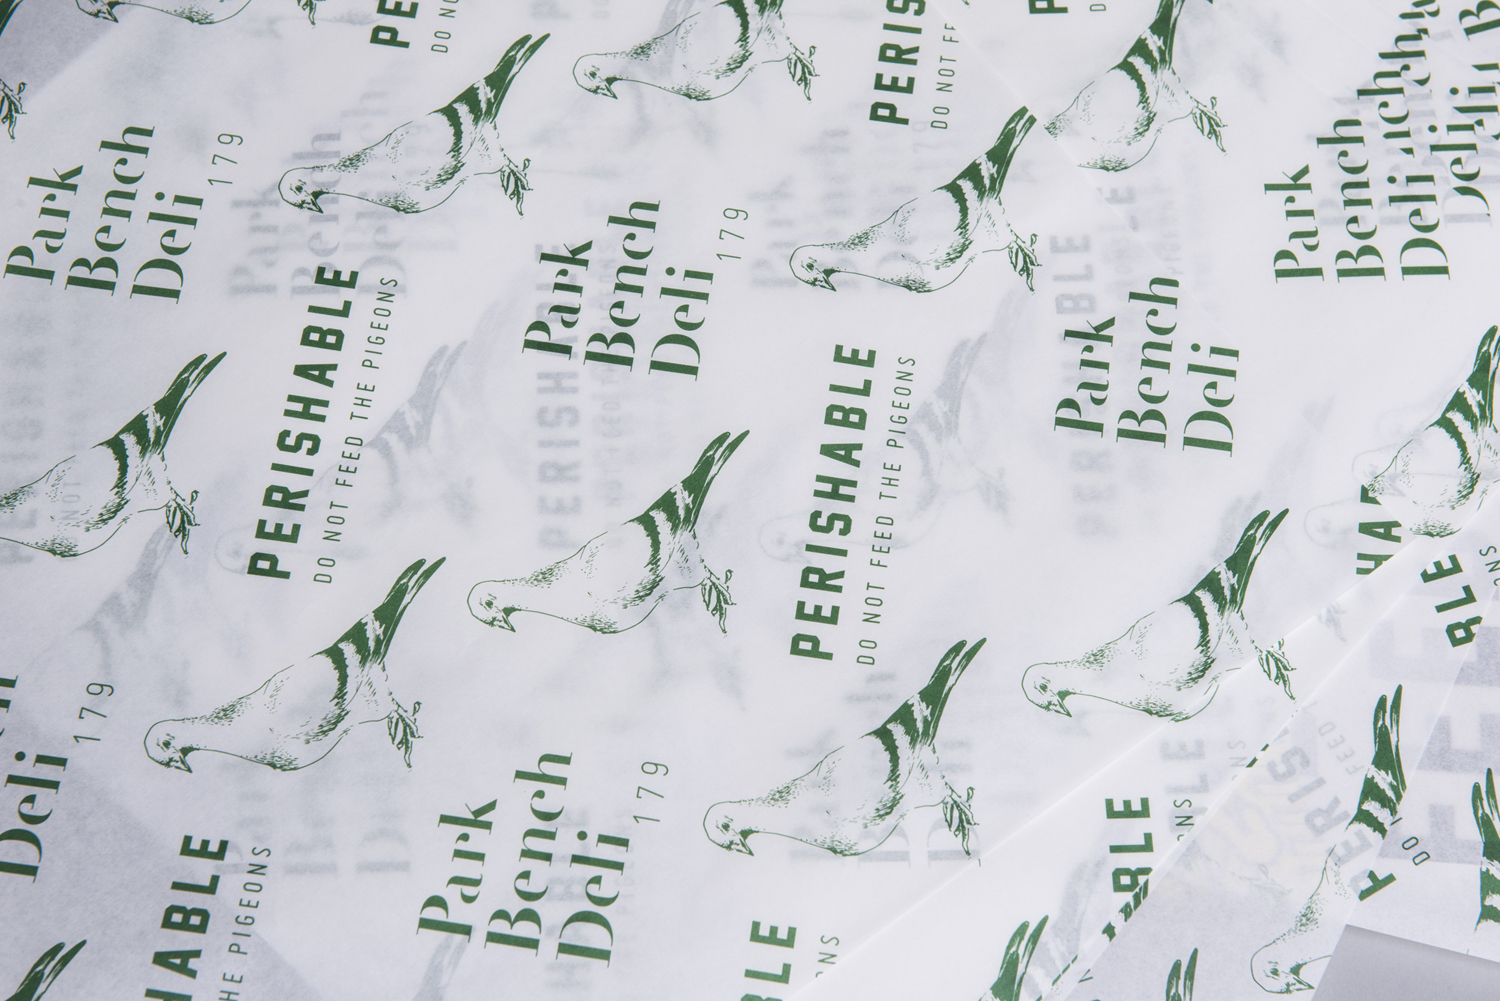 Brand identity and packaging by Foreign Policy for Singapore's Park Bench Deli